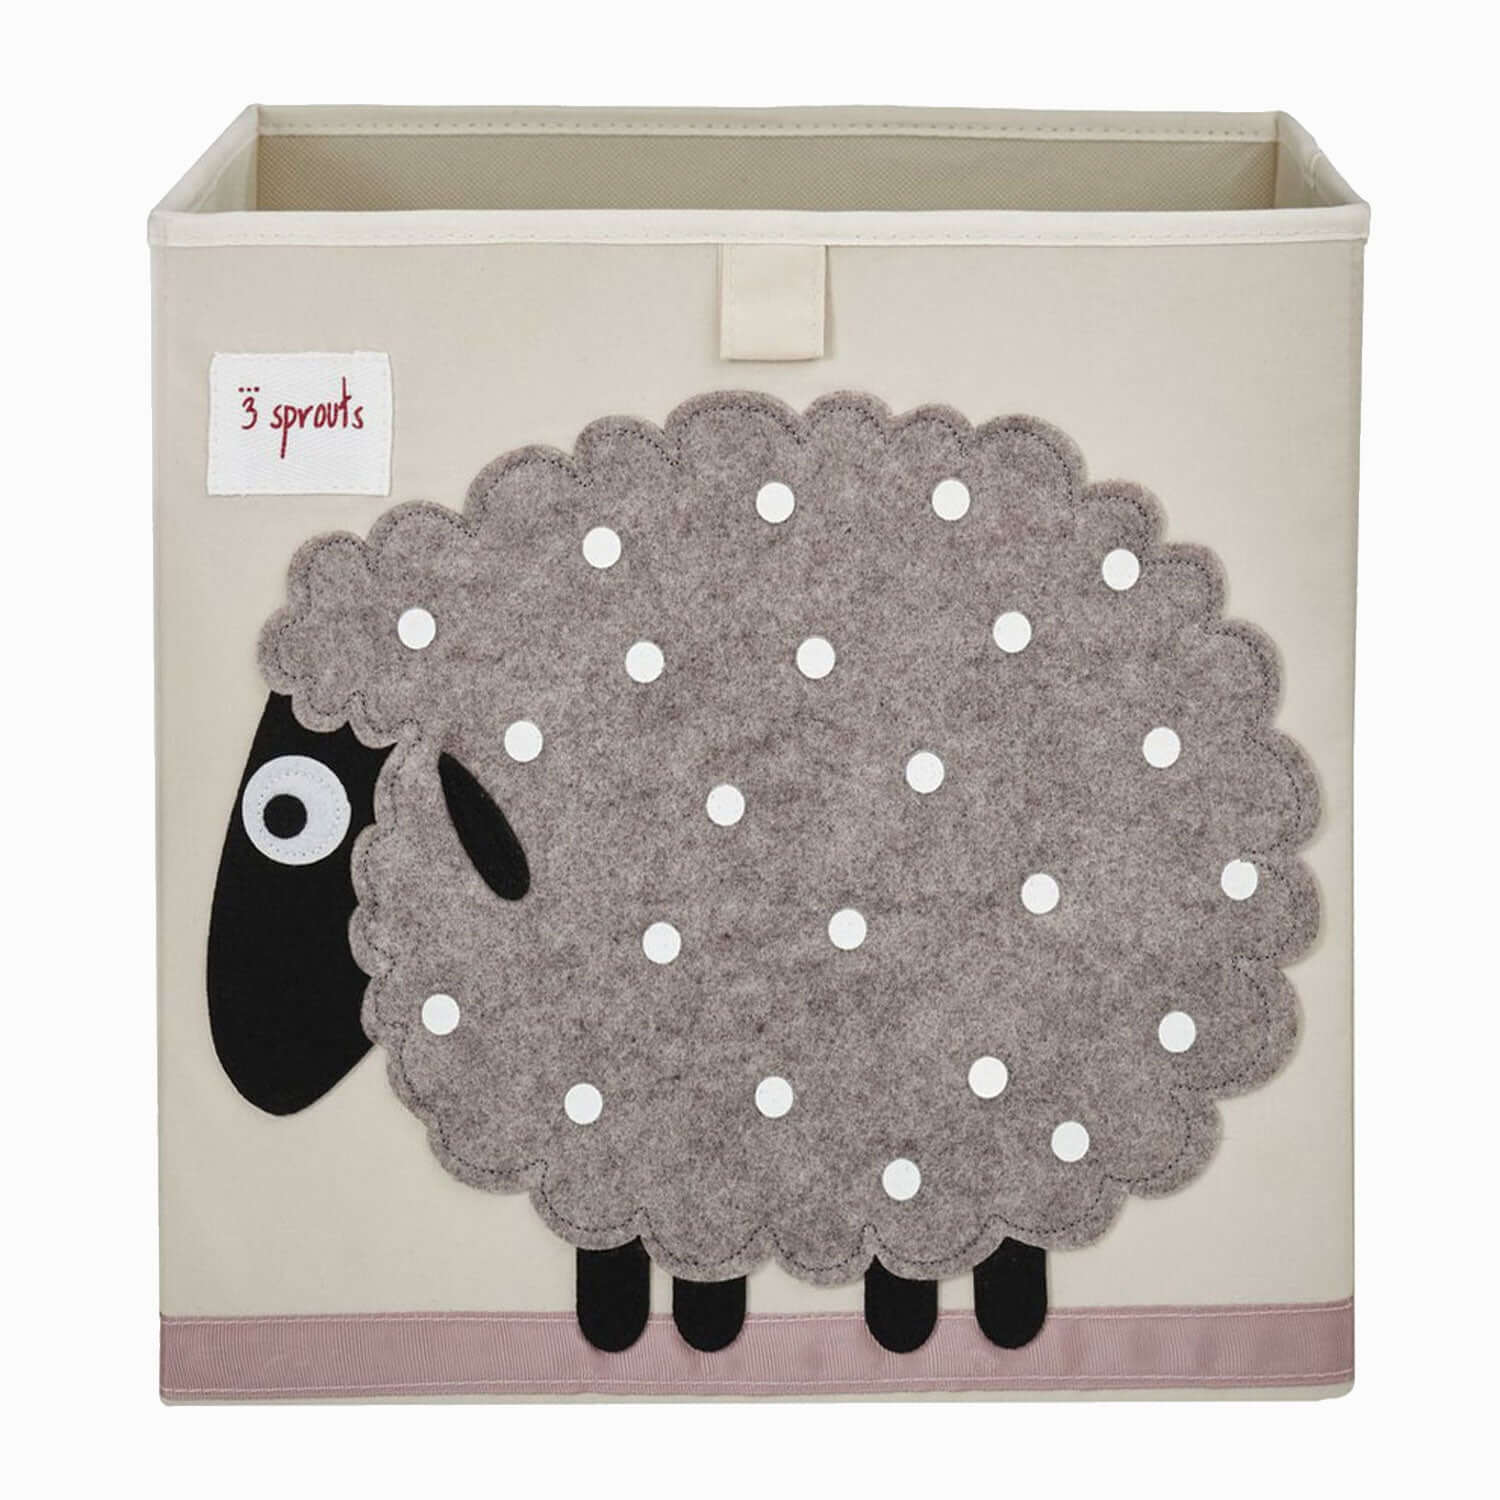 An image of 3 Sprouts Toy Storage Box (Sheep) – Cute Kids' Storage